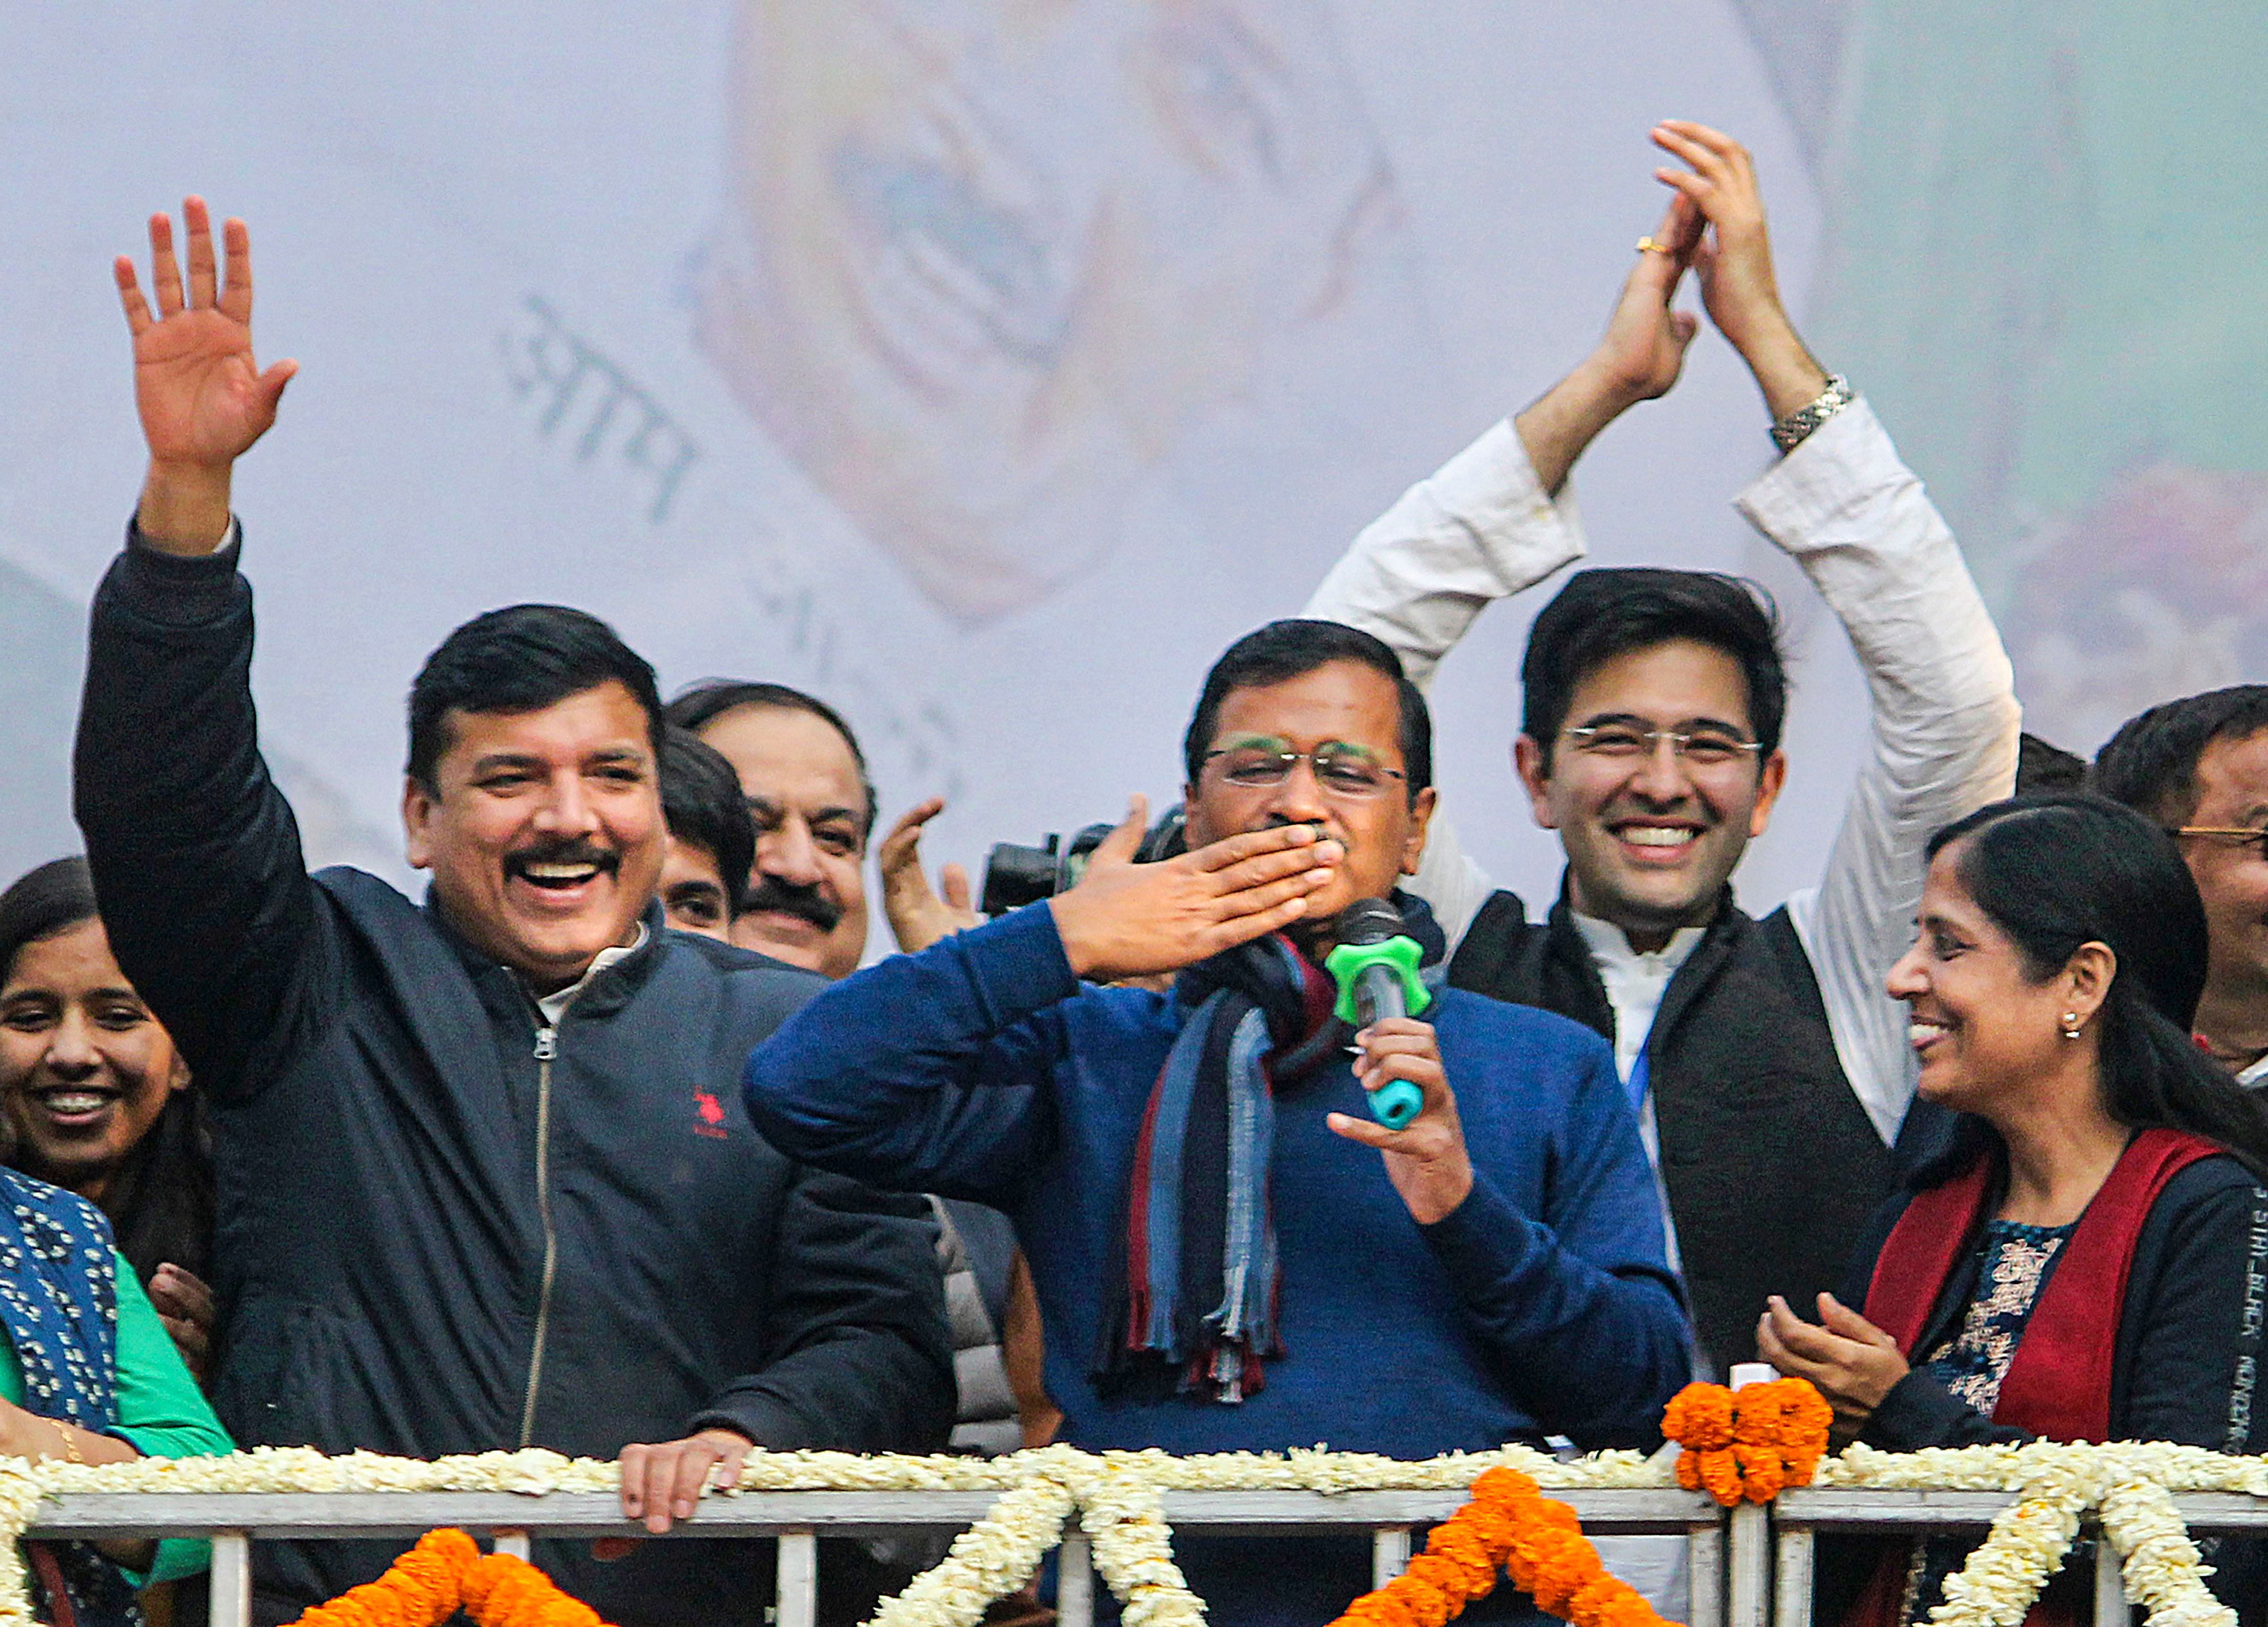 Delhi CM and AAP convenor Arvind Kejriwal (C) gestures during his address to supporters after party's victory in the State Assembly polls, at AAP office in New Delhi, Tuesday, Feb. 11, 2020. Kejriwal's wife Sunita, and party leaders Sanjay Singh are also seen. (PTI Photo)